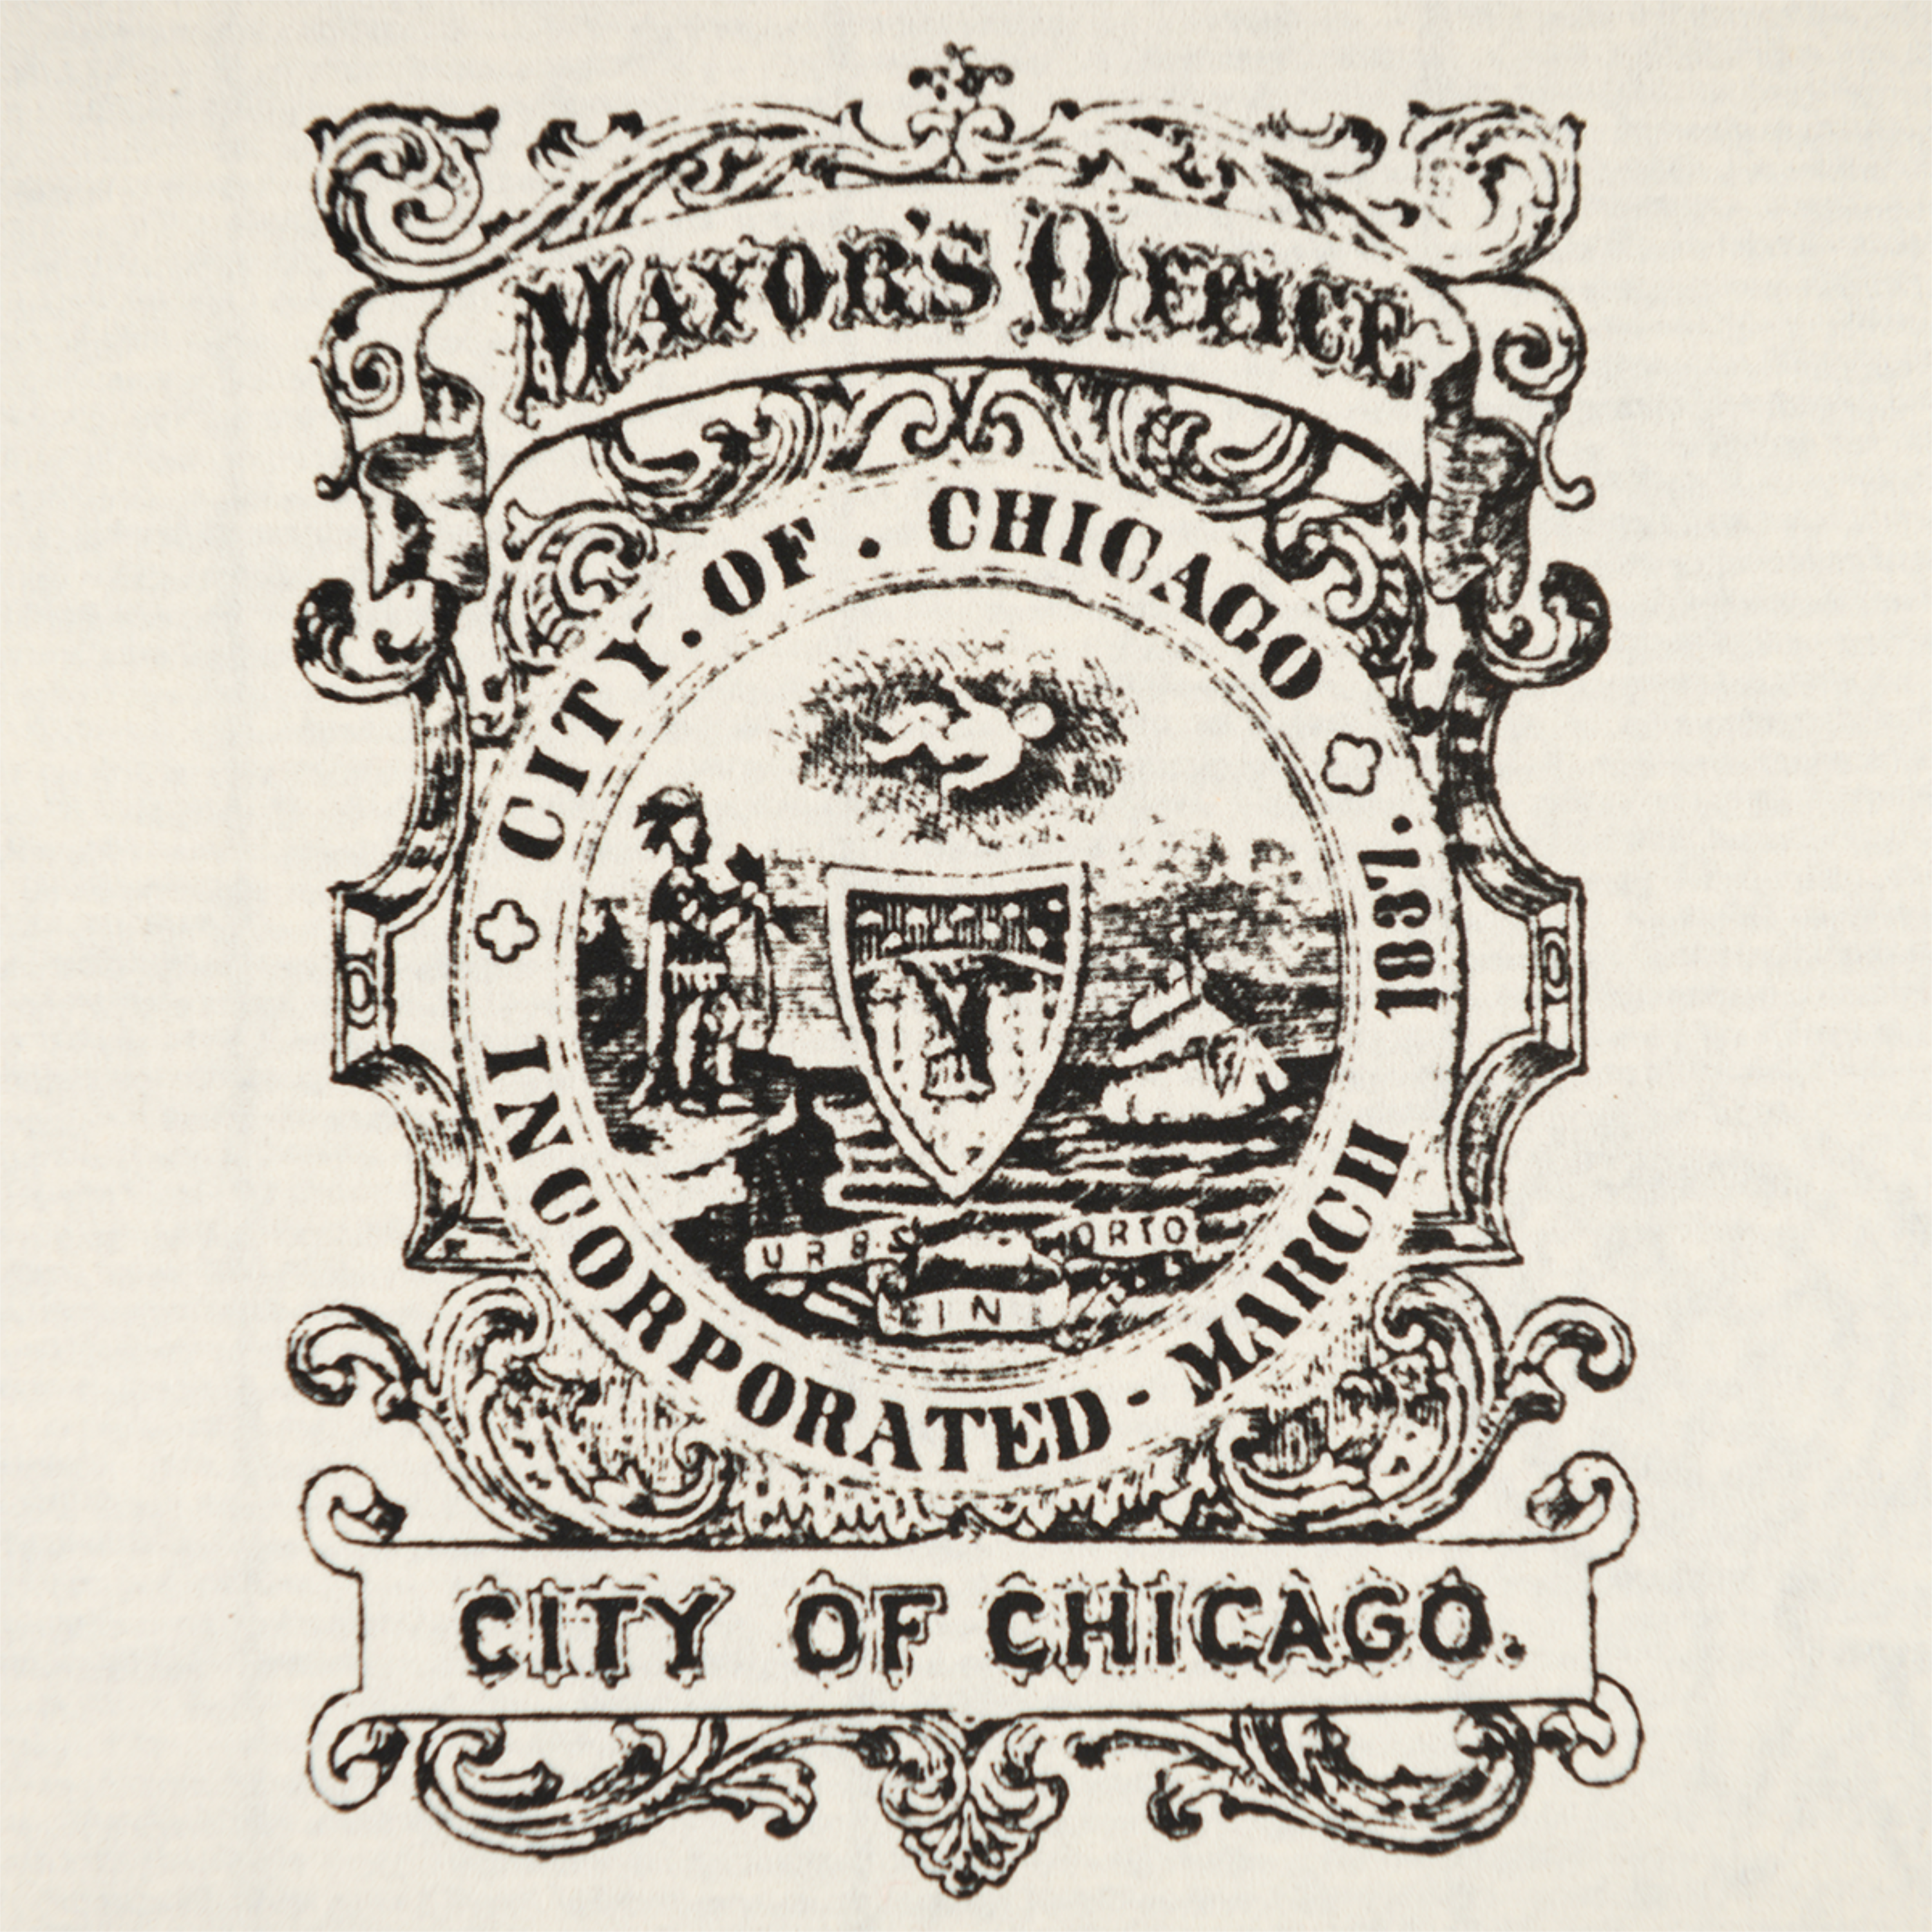 A copy of an 1880 version of the seal.